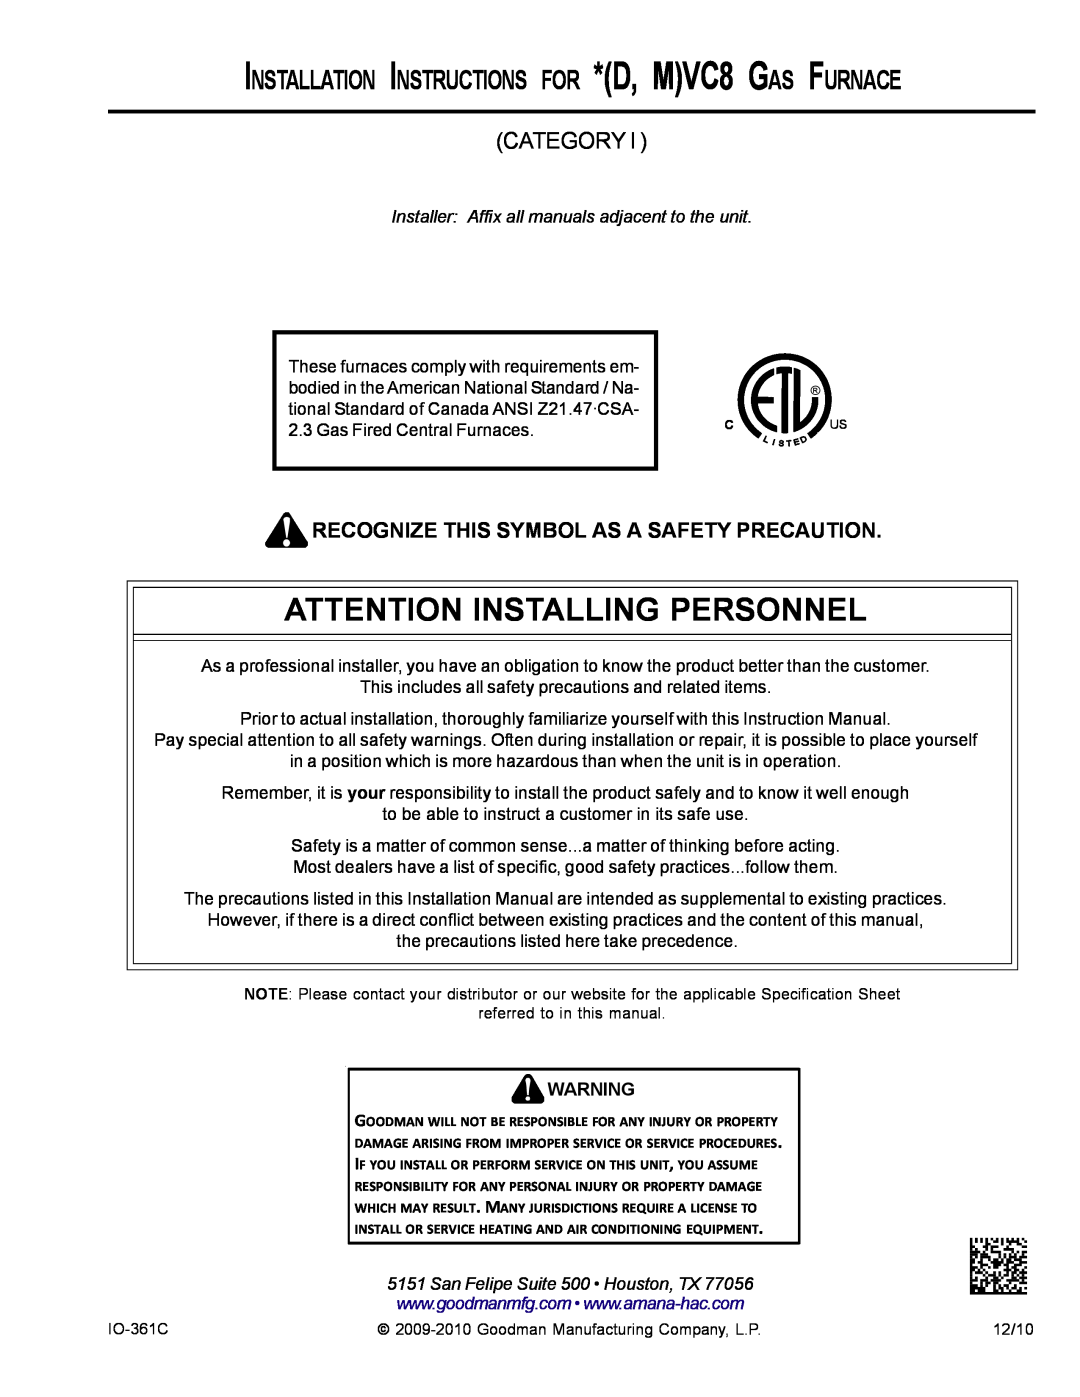 Goodman Mfg VC8 instruction manual Attention Installing Personnel, Category 